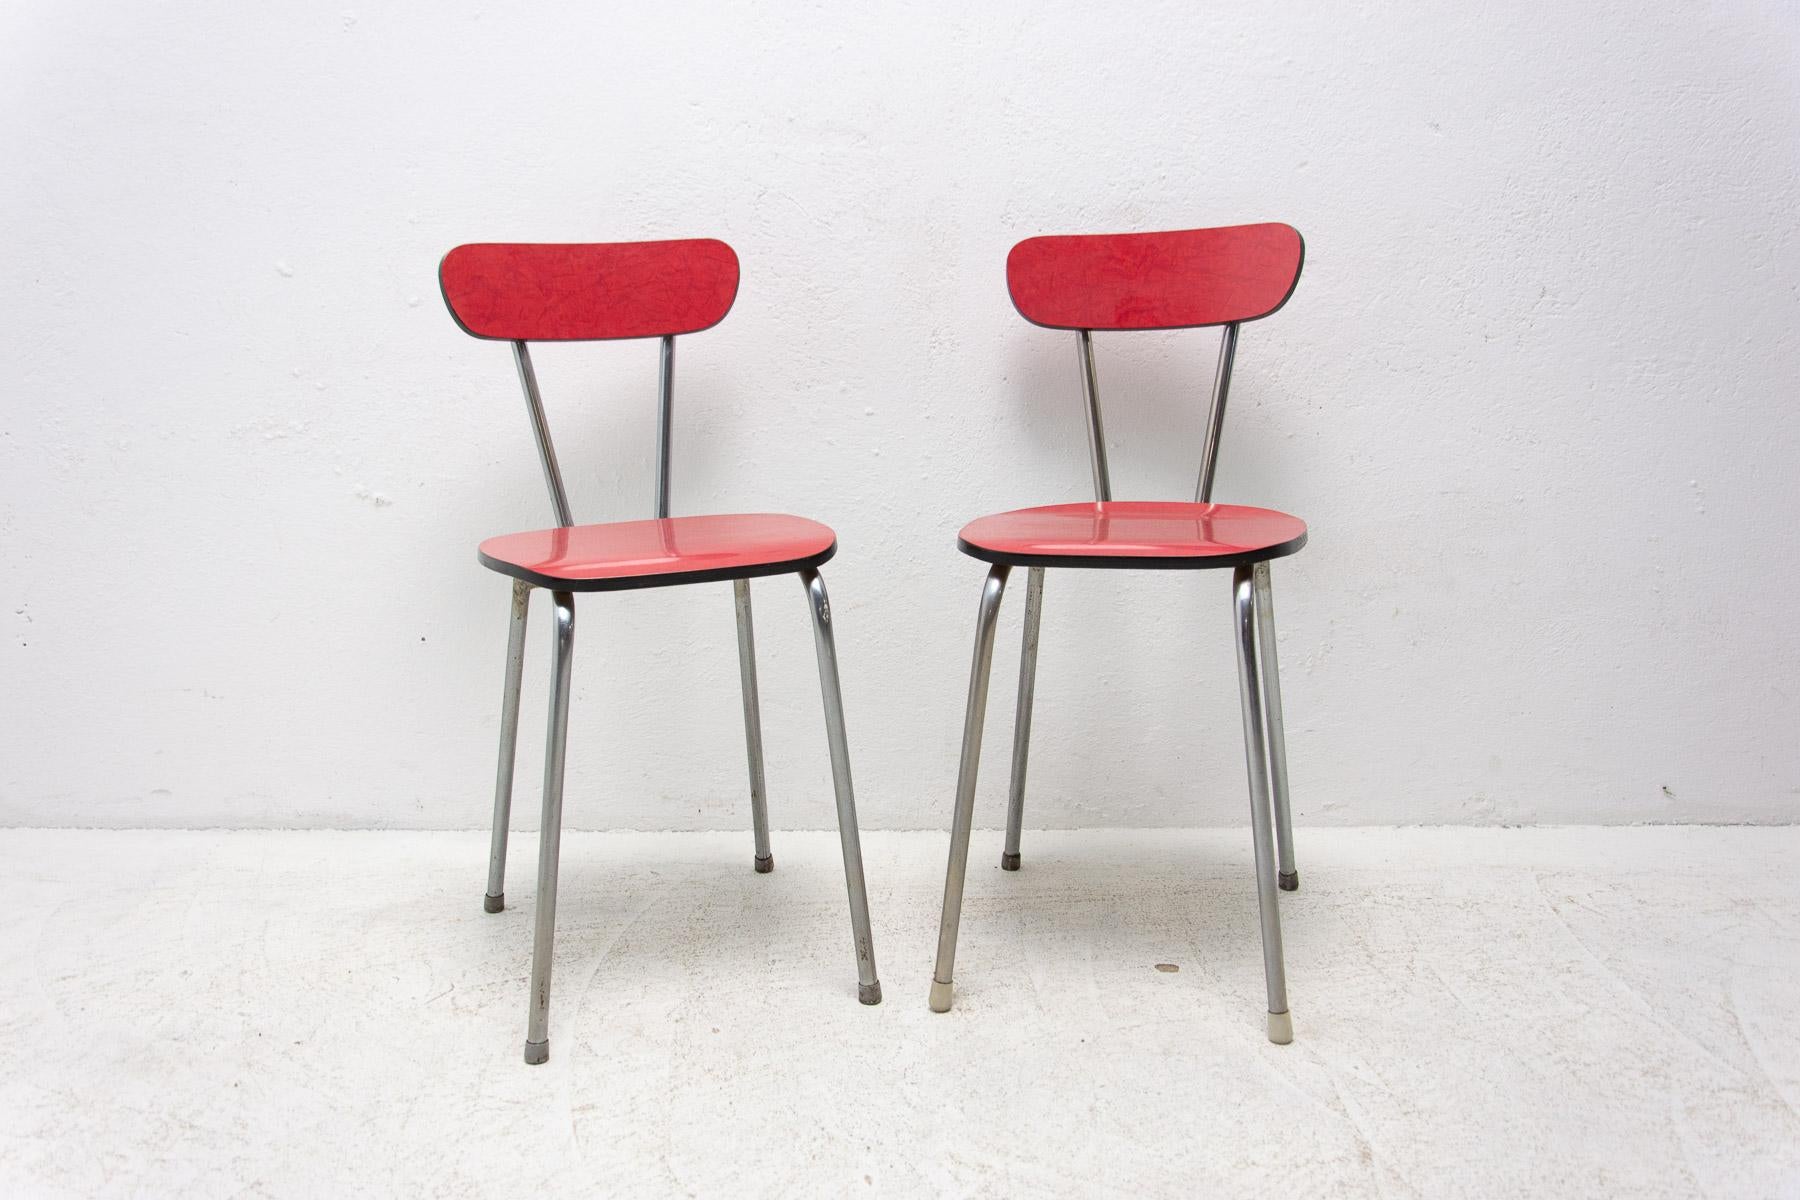 Mid-century color formica cafe or dining chairs with chrome legs. Made in the 1960’s. In very good Vintage condition. Price is for the pair.

Measures: Height: 78 cm

Width: 35 cm

Depth: 41 cm

Seat height: 46 cm.